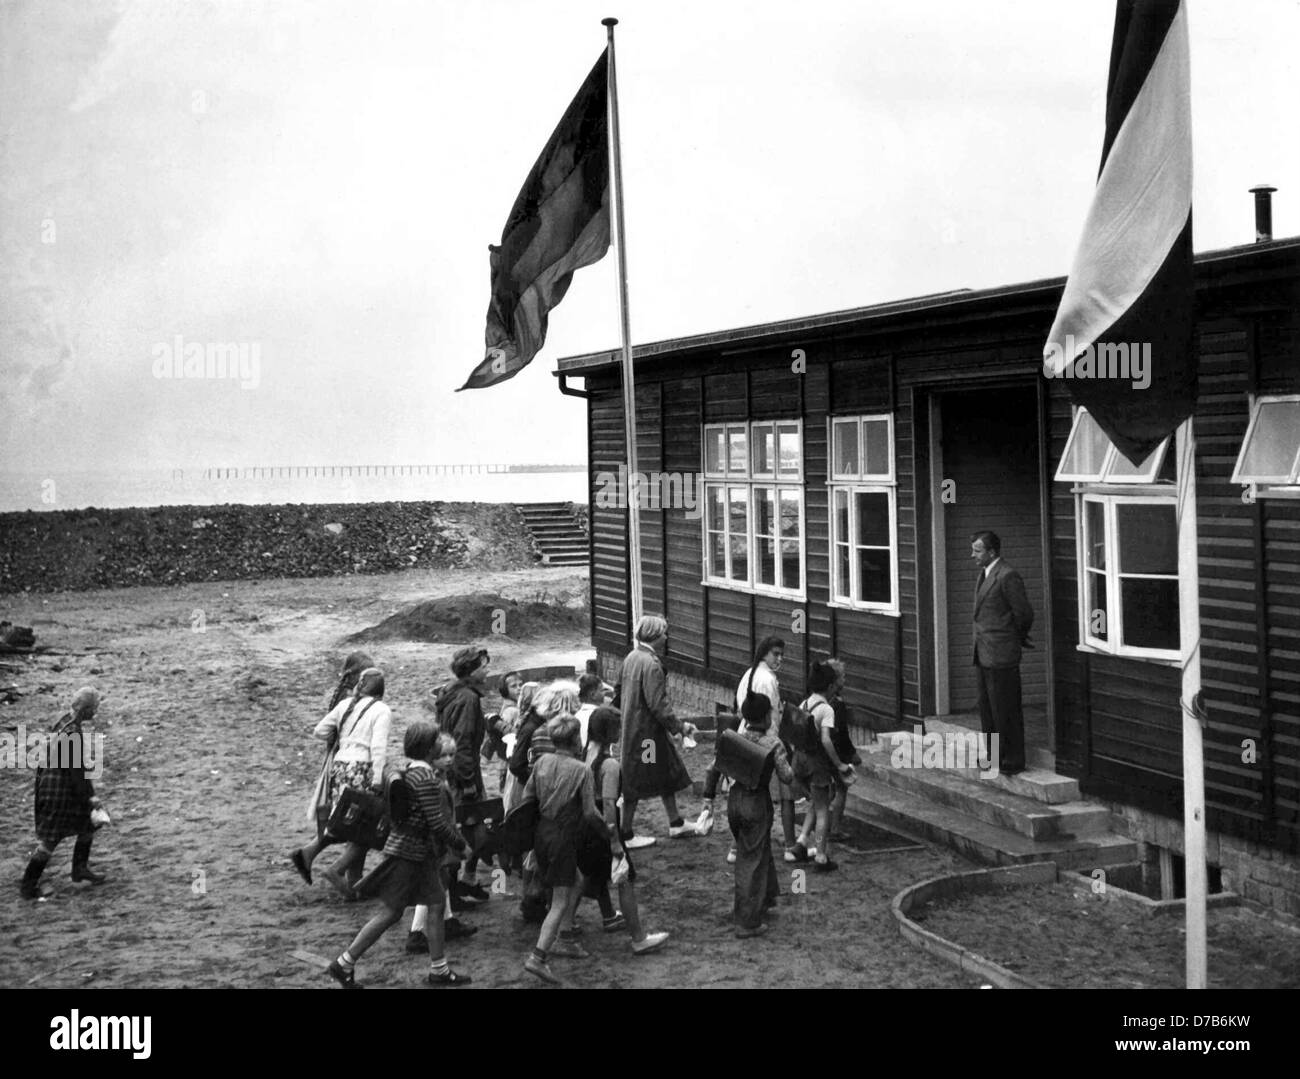 Pupils enter the school building in Helgoland in 1954. On the 18th of August in 1954, the running of the school began.The British try to destroy Helgoland completely on the 18th of April in 1945. After World War II the population was expelled from the island, while Britain occupied the island for seven years and destroyed it by blastings. The island was given back on the 1st of March in 1952 at midnight, which was celebrated with a ceremony. Stock Photo